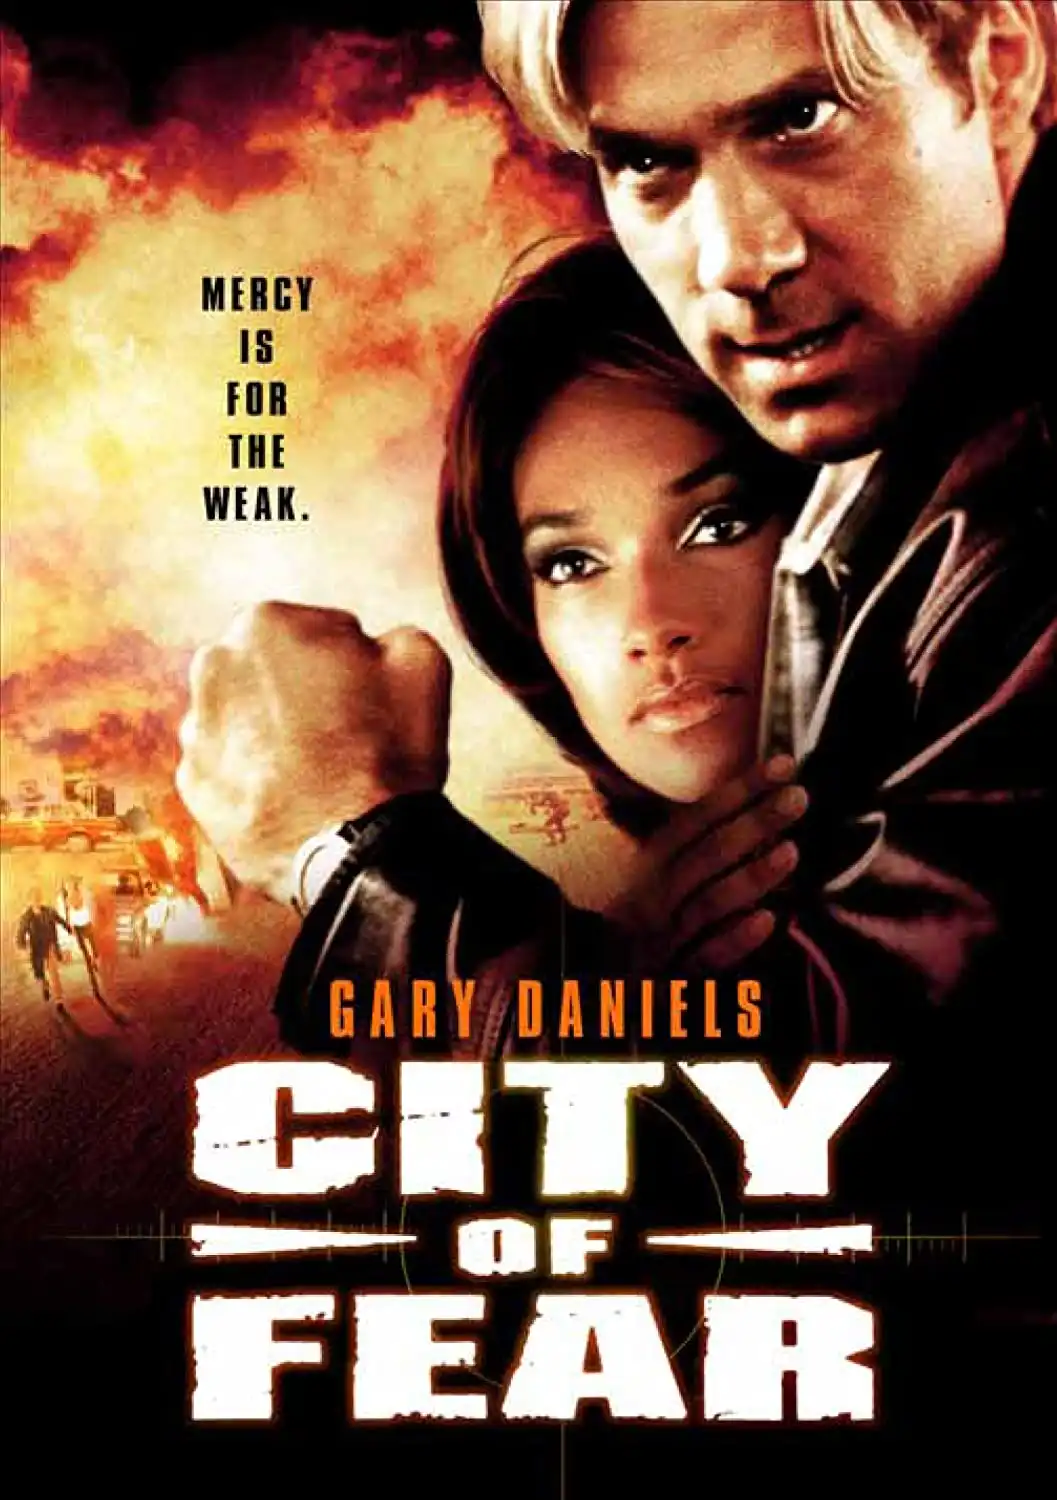 Watch and Download City of Fear 10